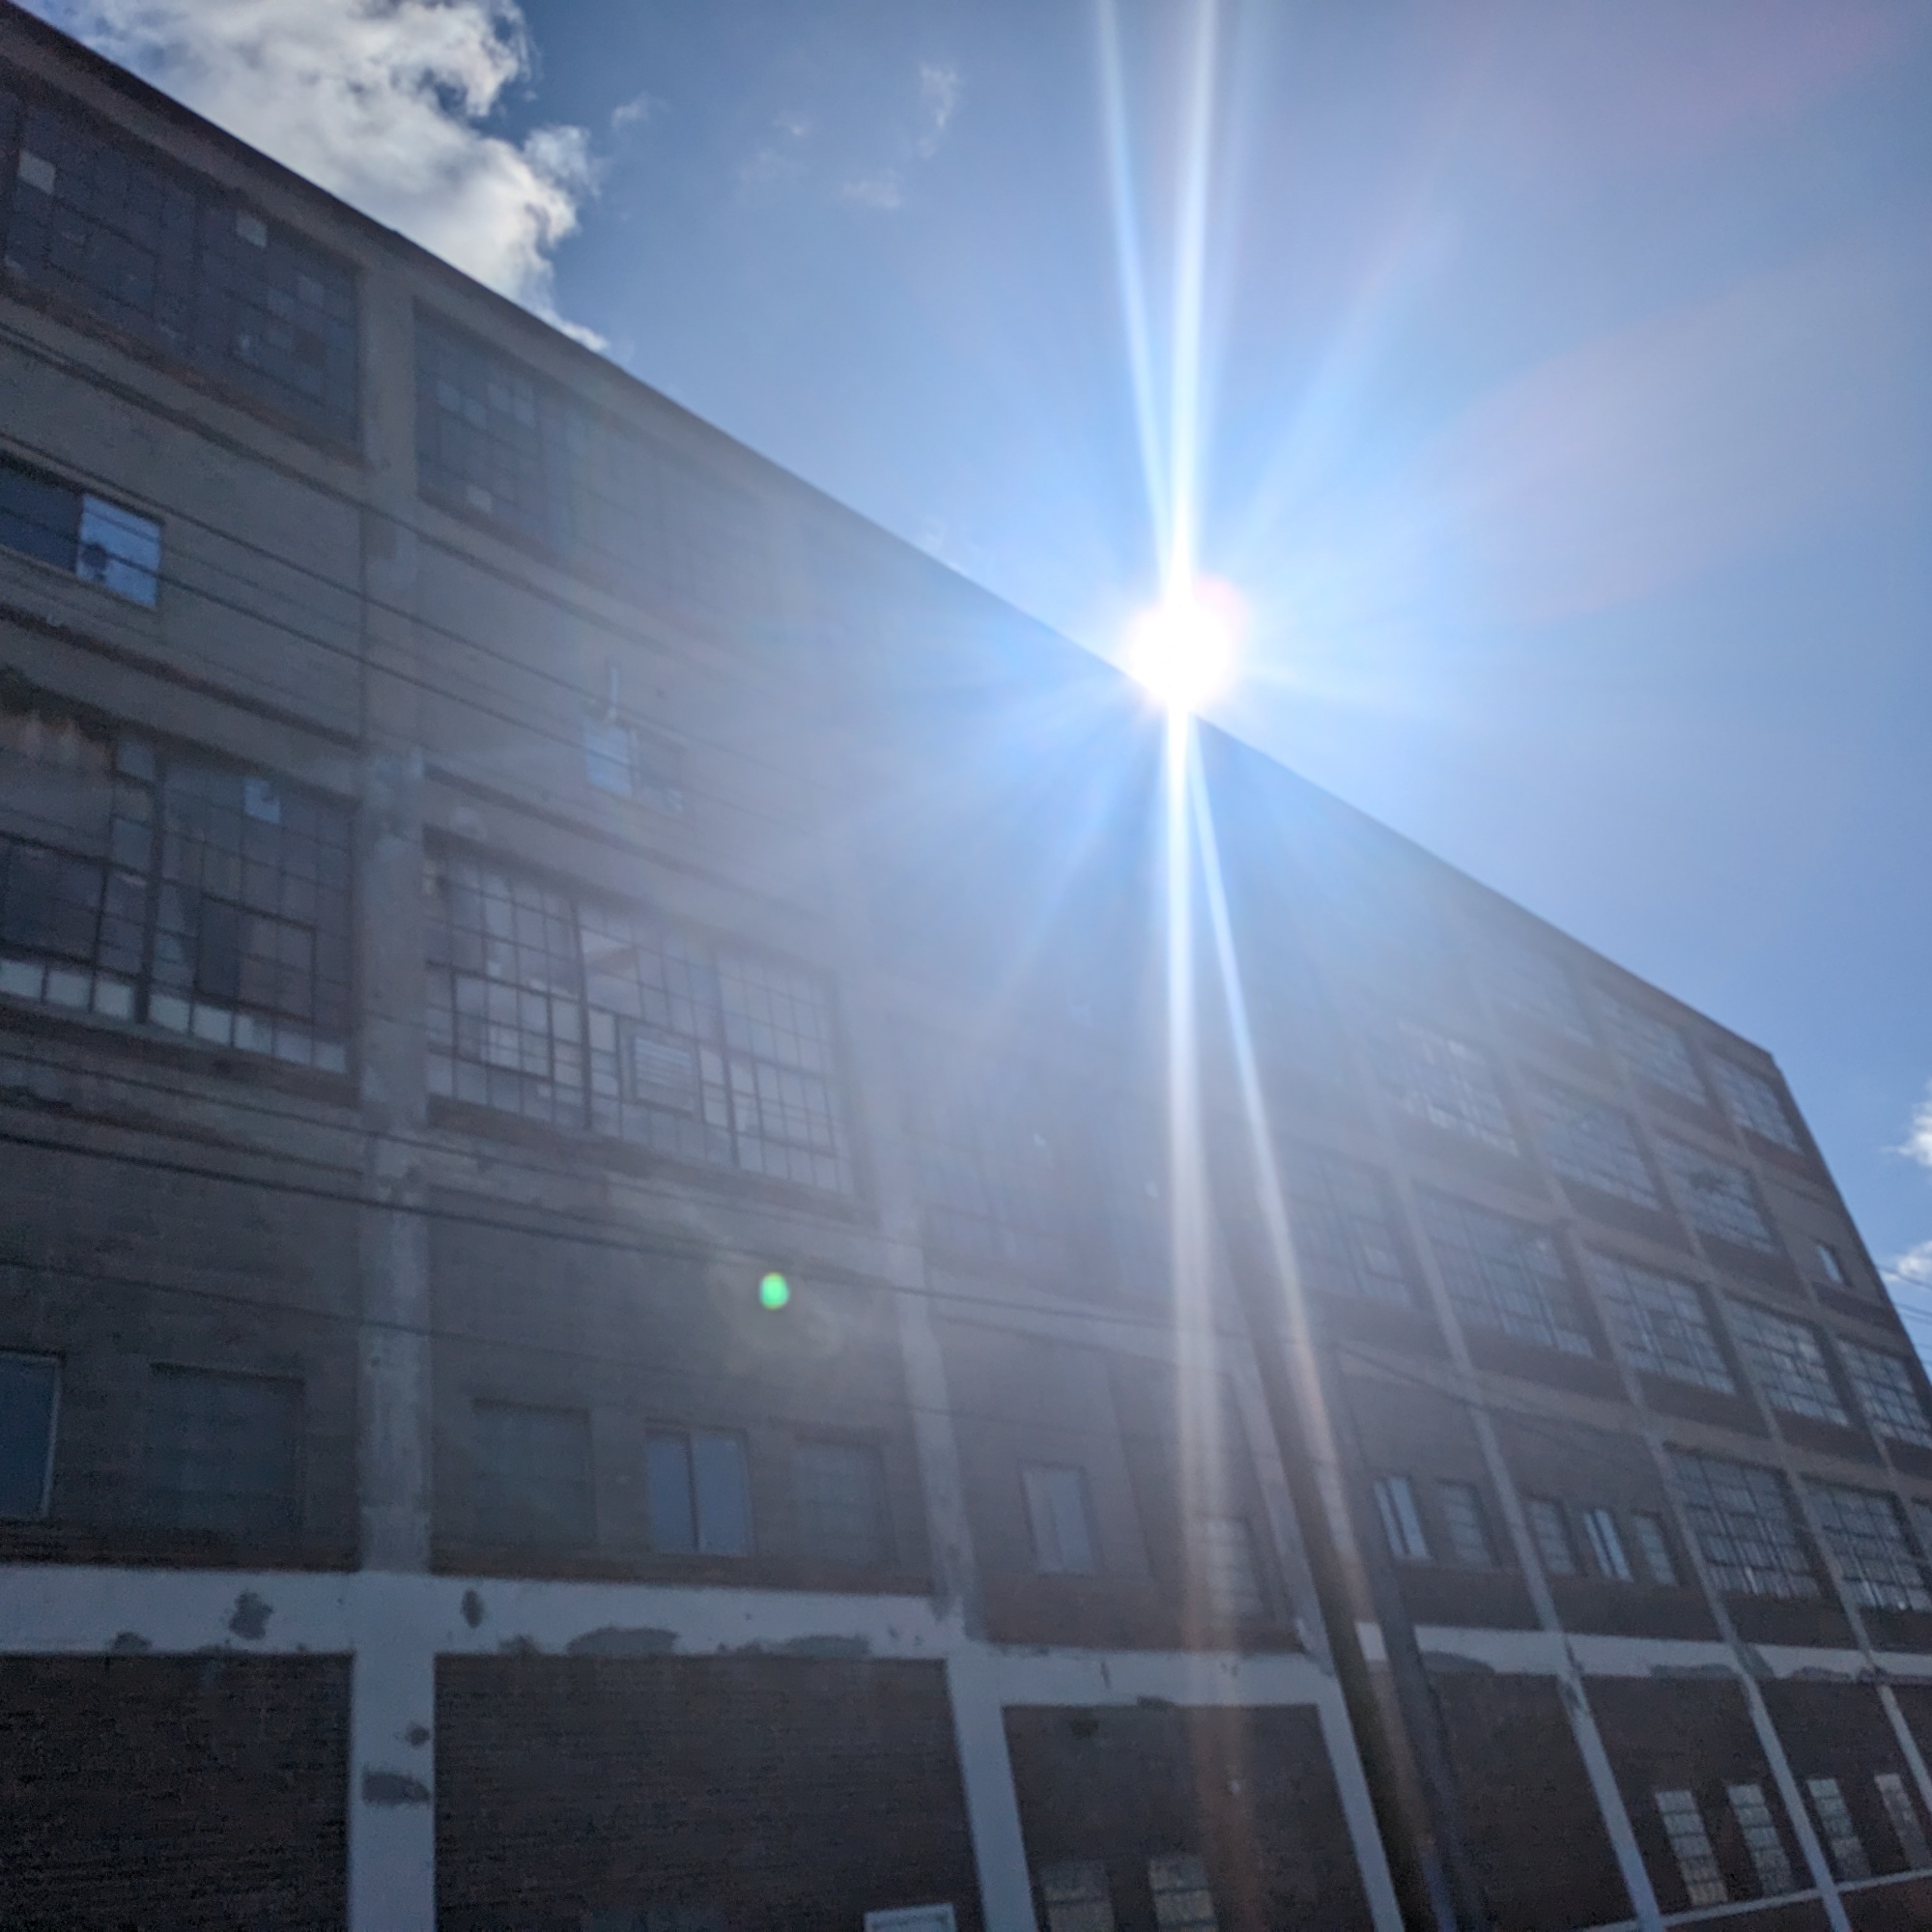 An image of the sun rising over a brick building in an urban landscape.